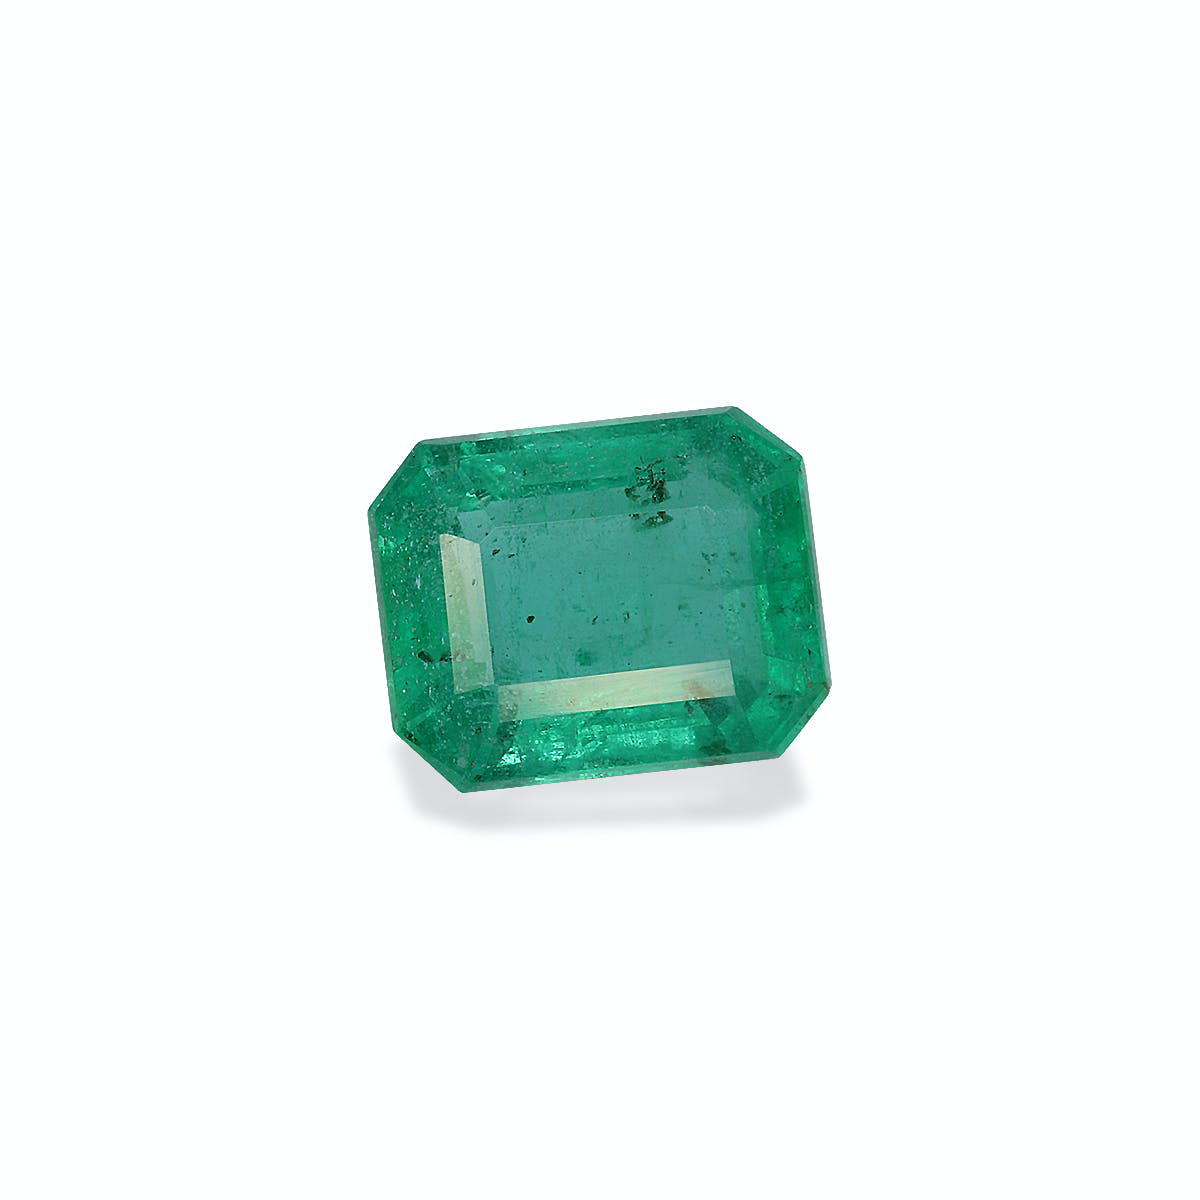 Picture of Green Zambian Emerald 2.08ct - 8x6mm (PG0320)